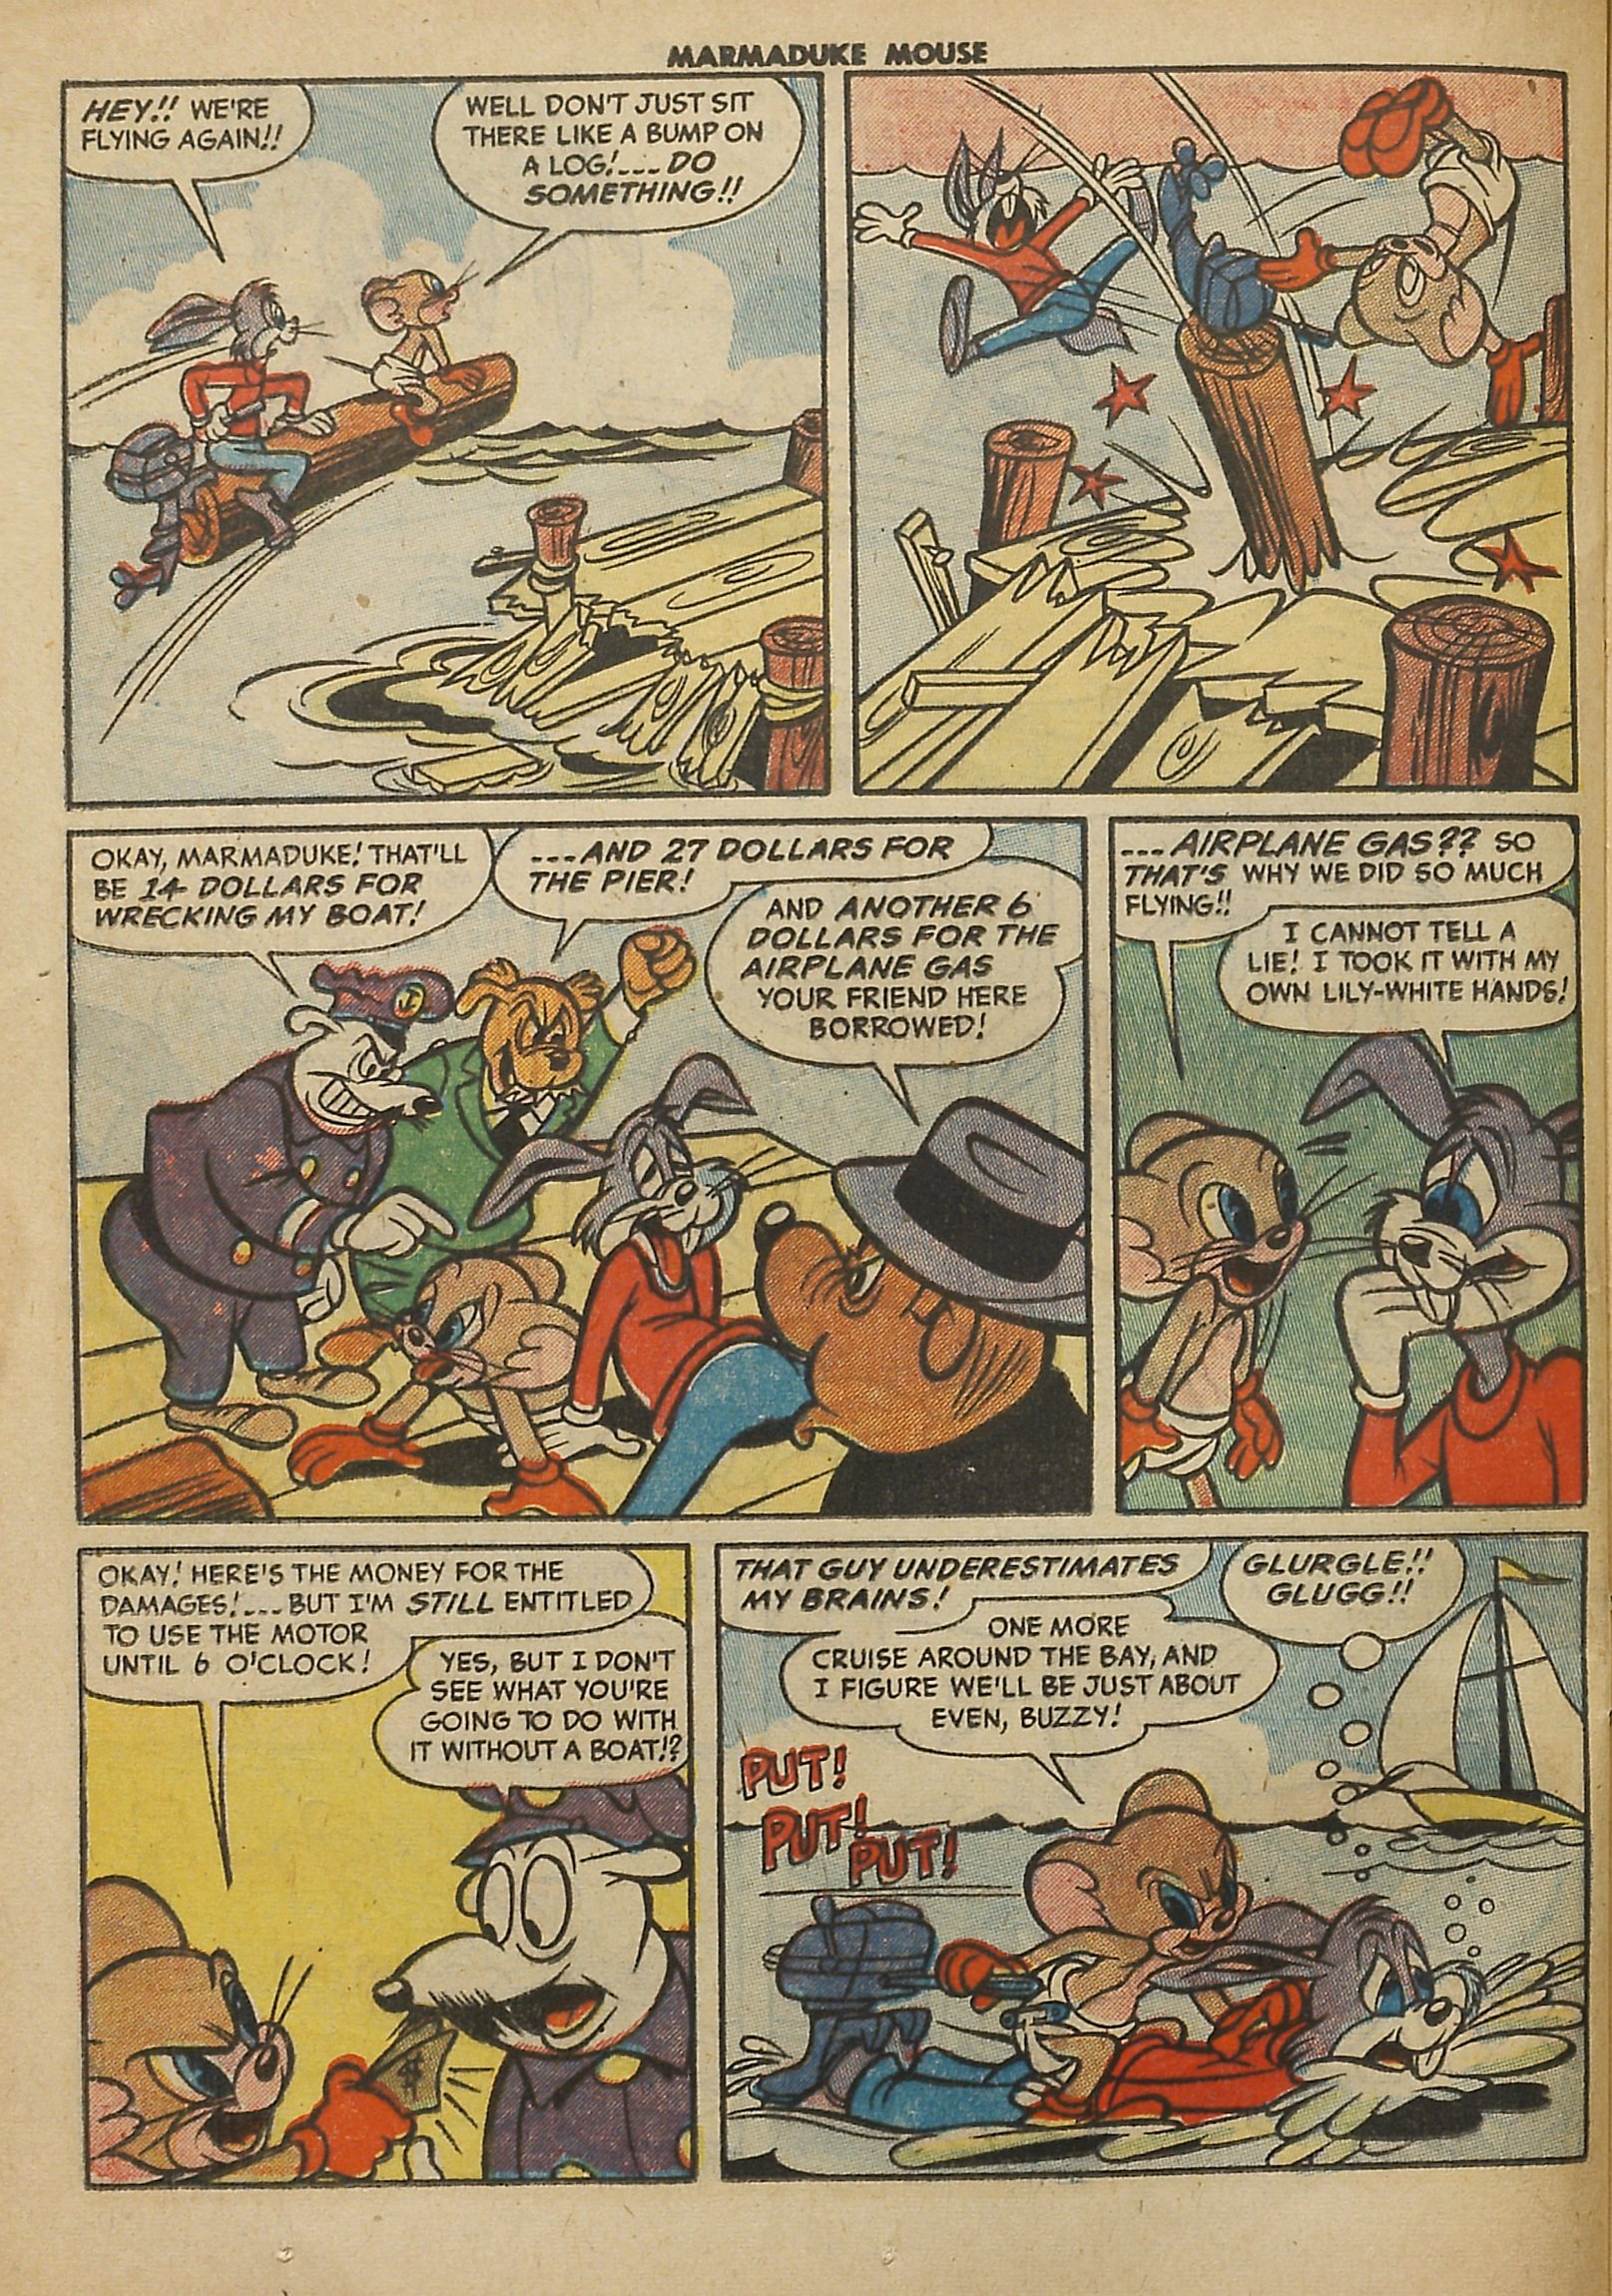 Read online Marmaduke Mouse comic -  Issue #48 - 22